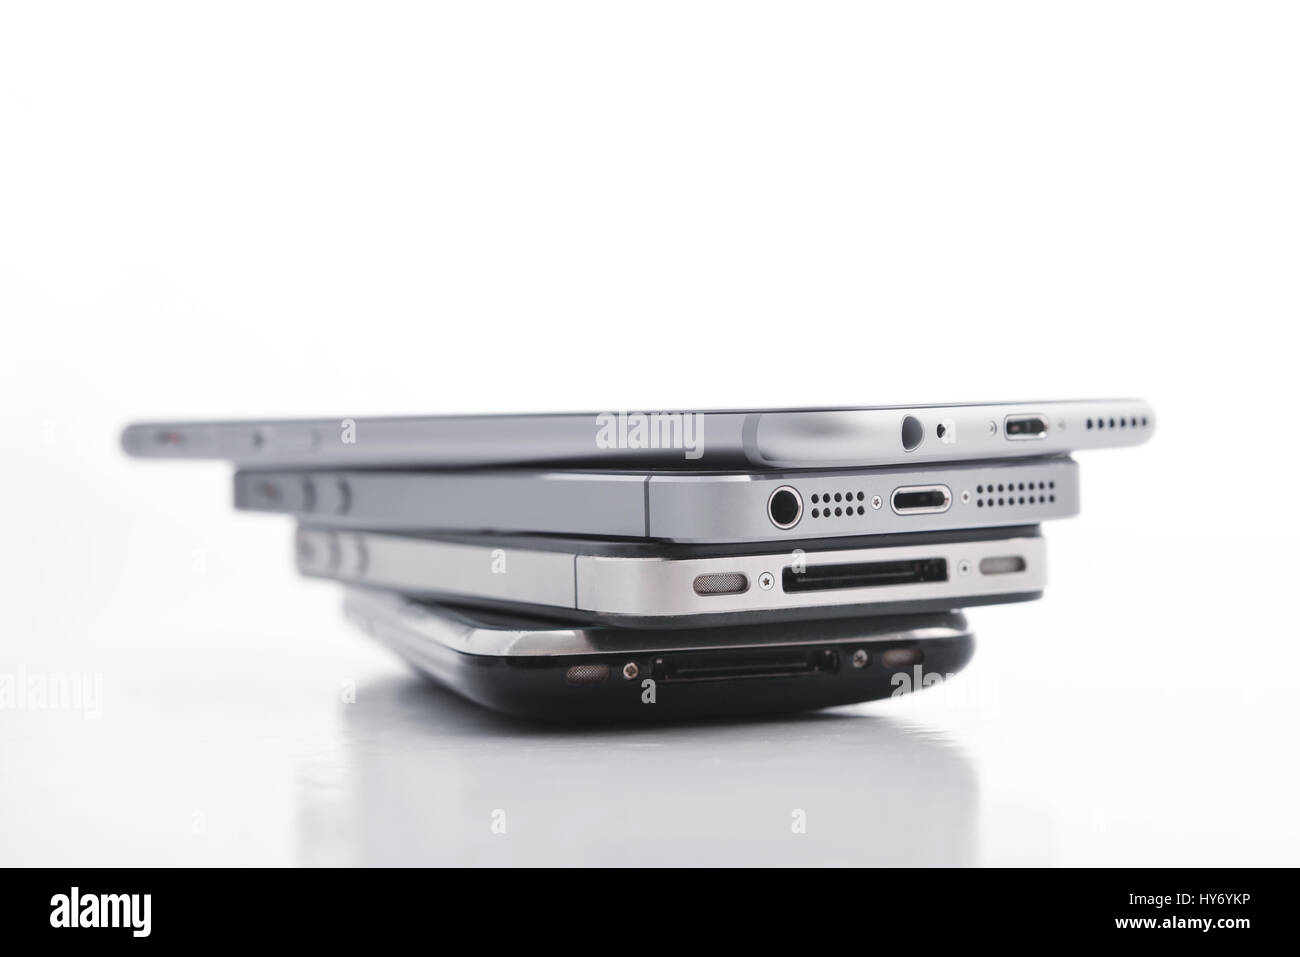 Kiev, Ukraine - March 05, 2016: Pile of Apple iPhone 5s, Apple iPhone 6, Apple iPhone 4 and Apple iPhone 3gs. Apple Inc. is an American multinational  Stock Photo